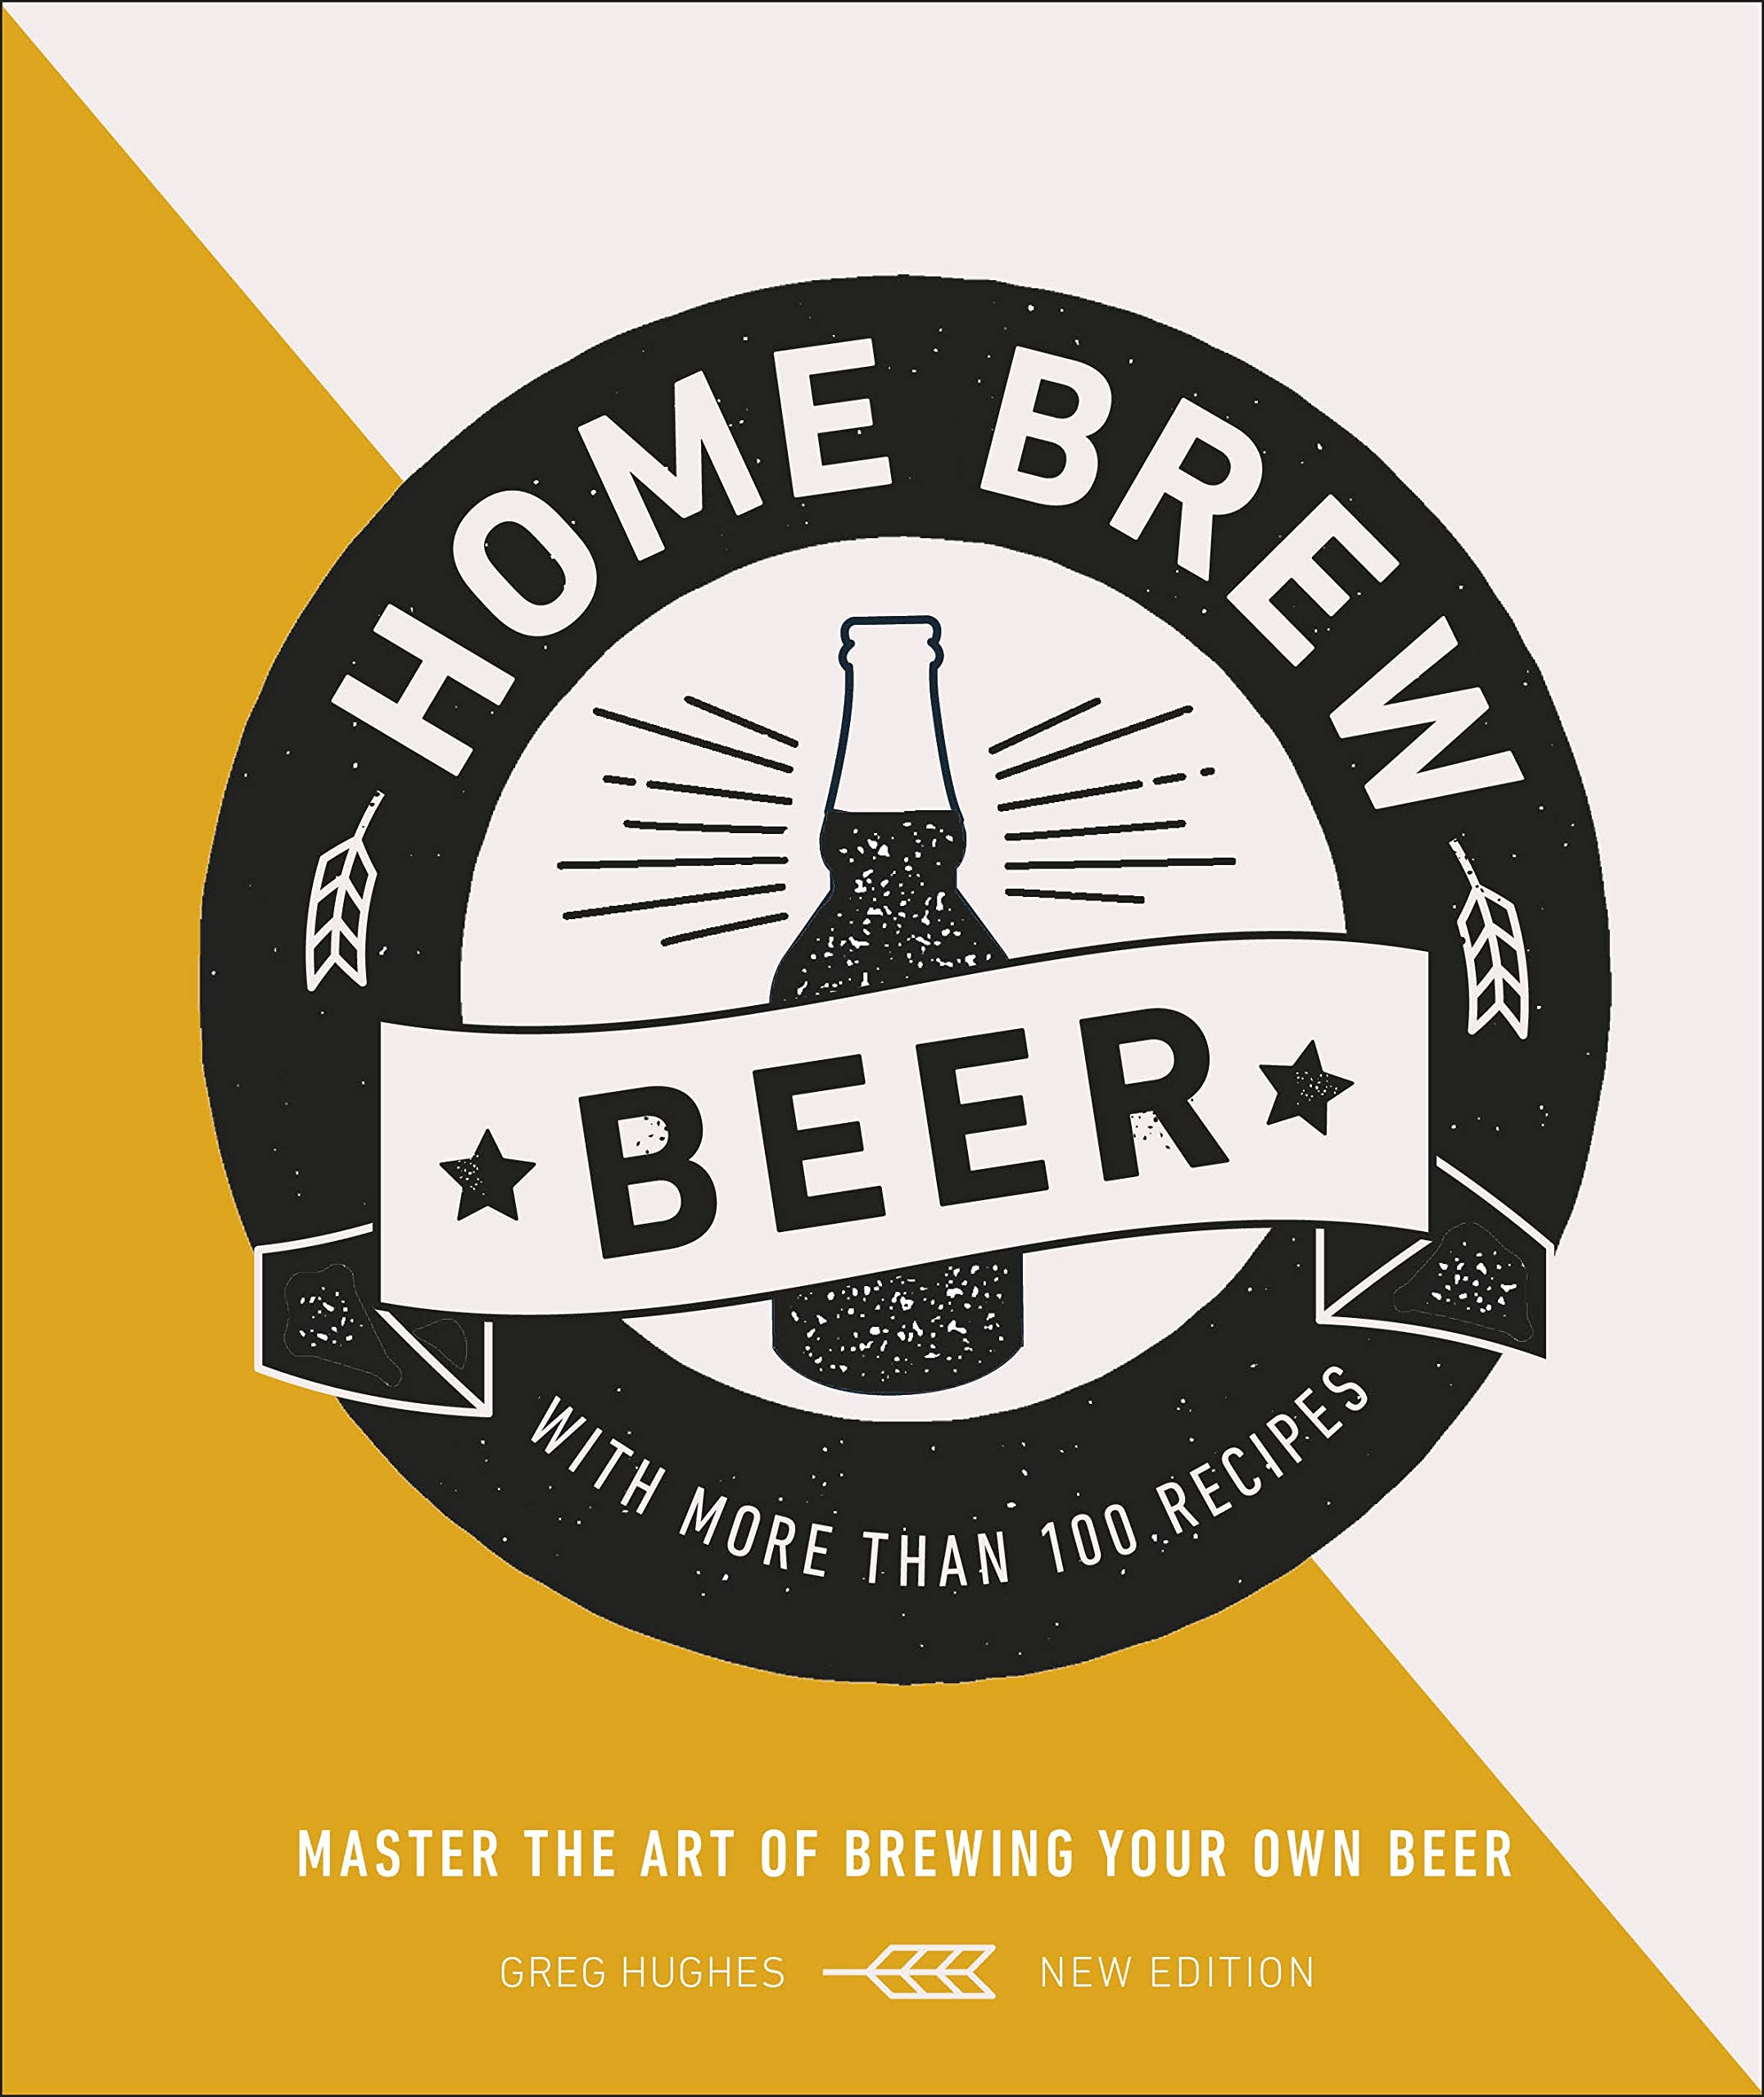 Home Brew Beer: Master the Art of Brewing Your Own Beer [Hardcover]